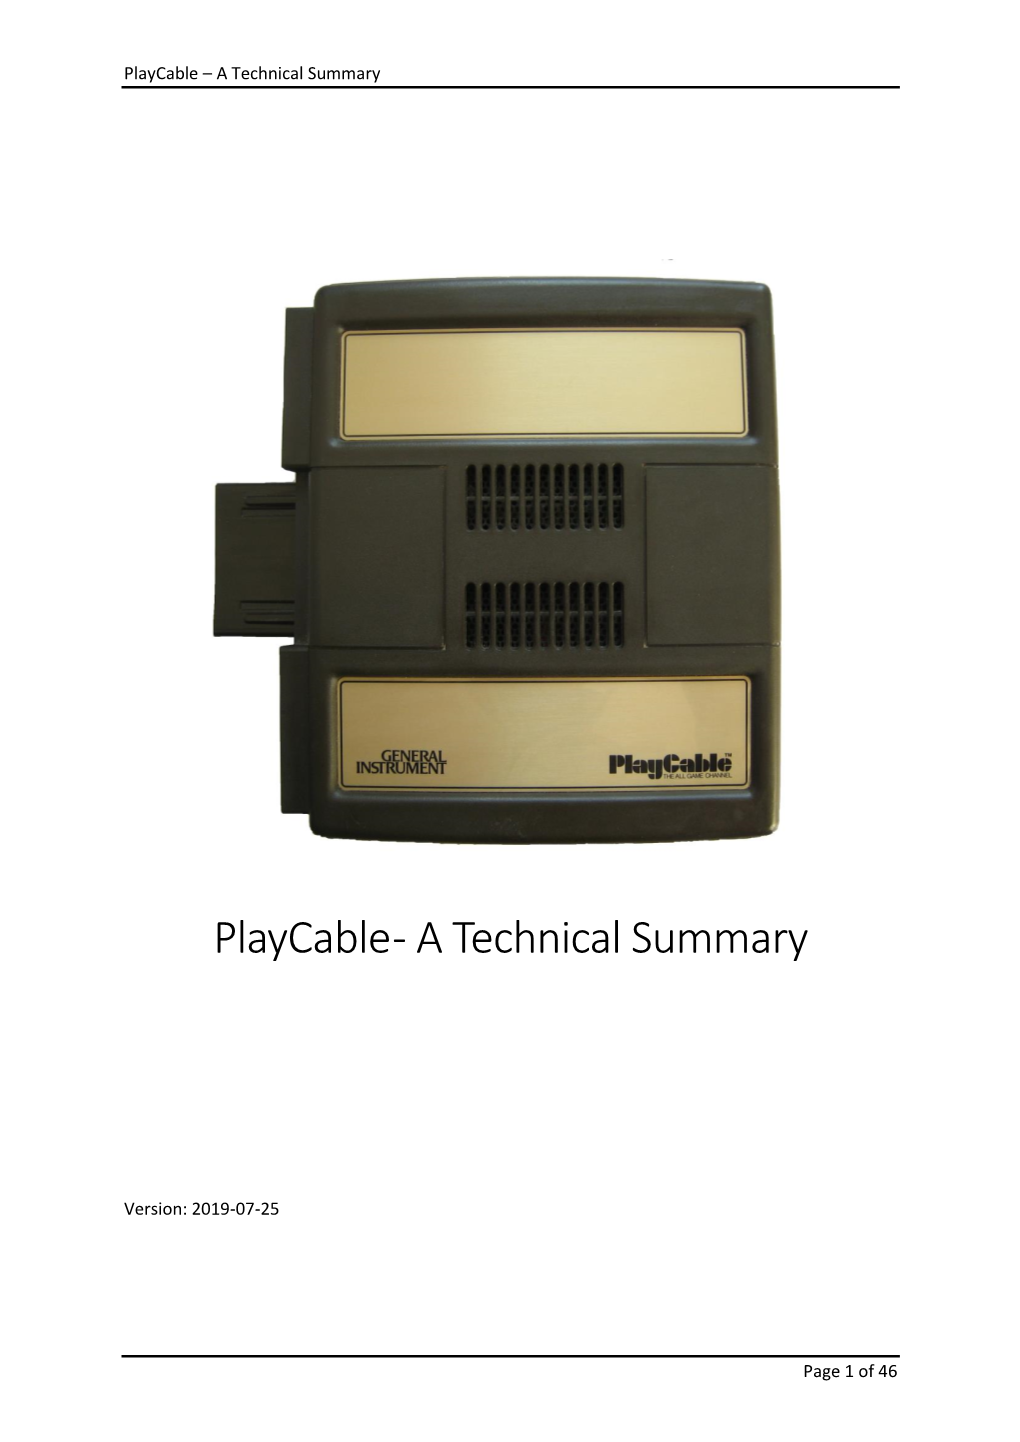 Playcable – a Technical Summary